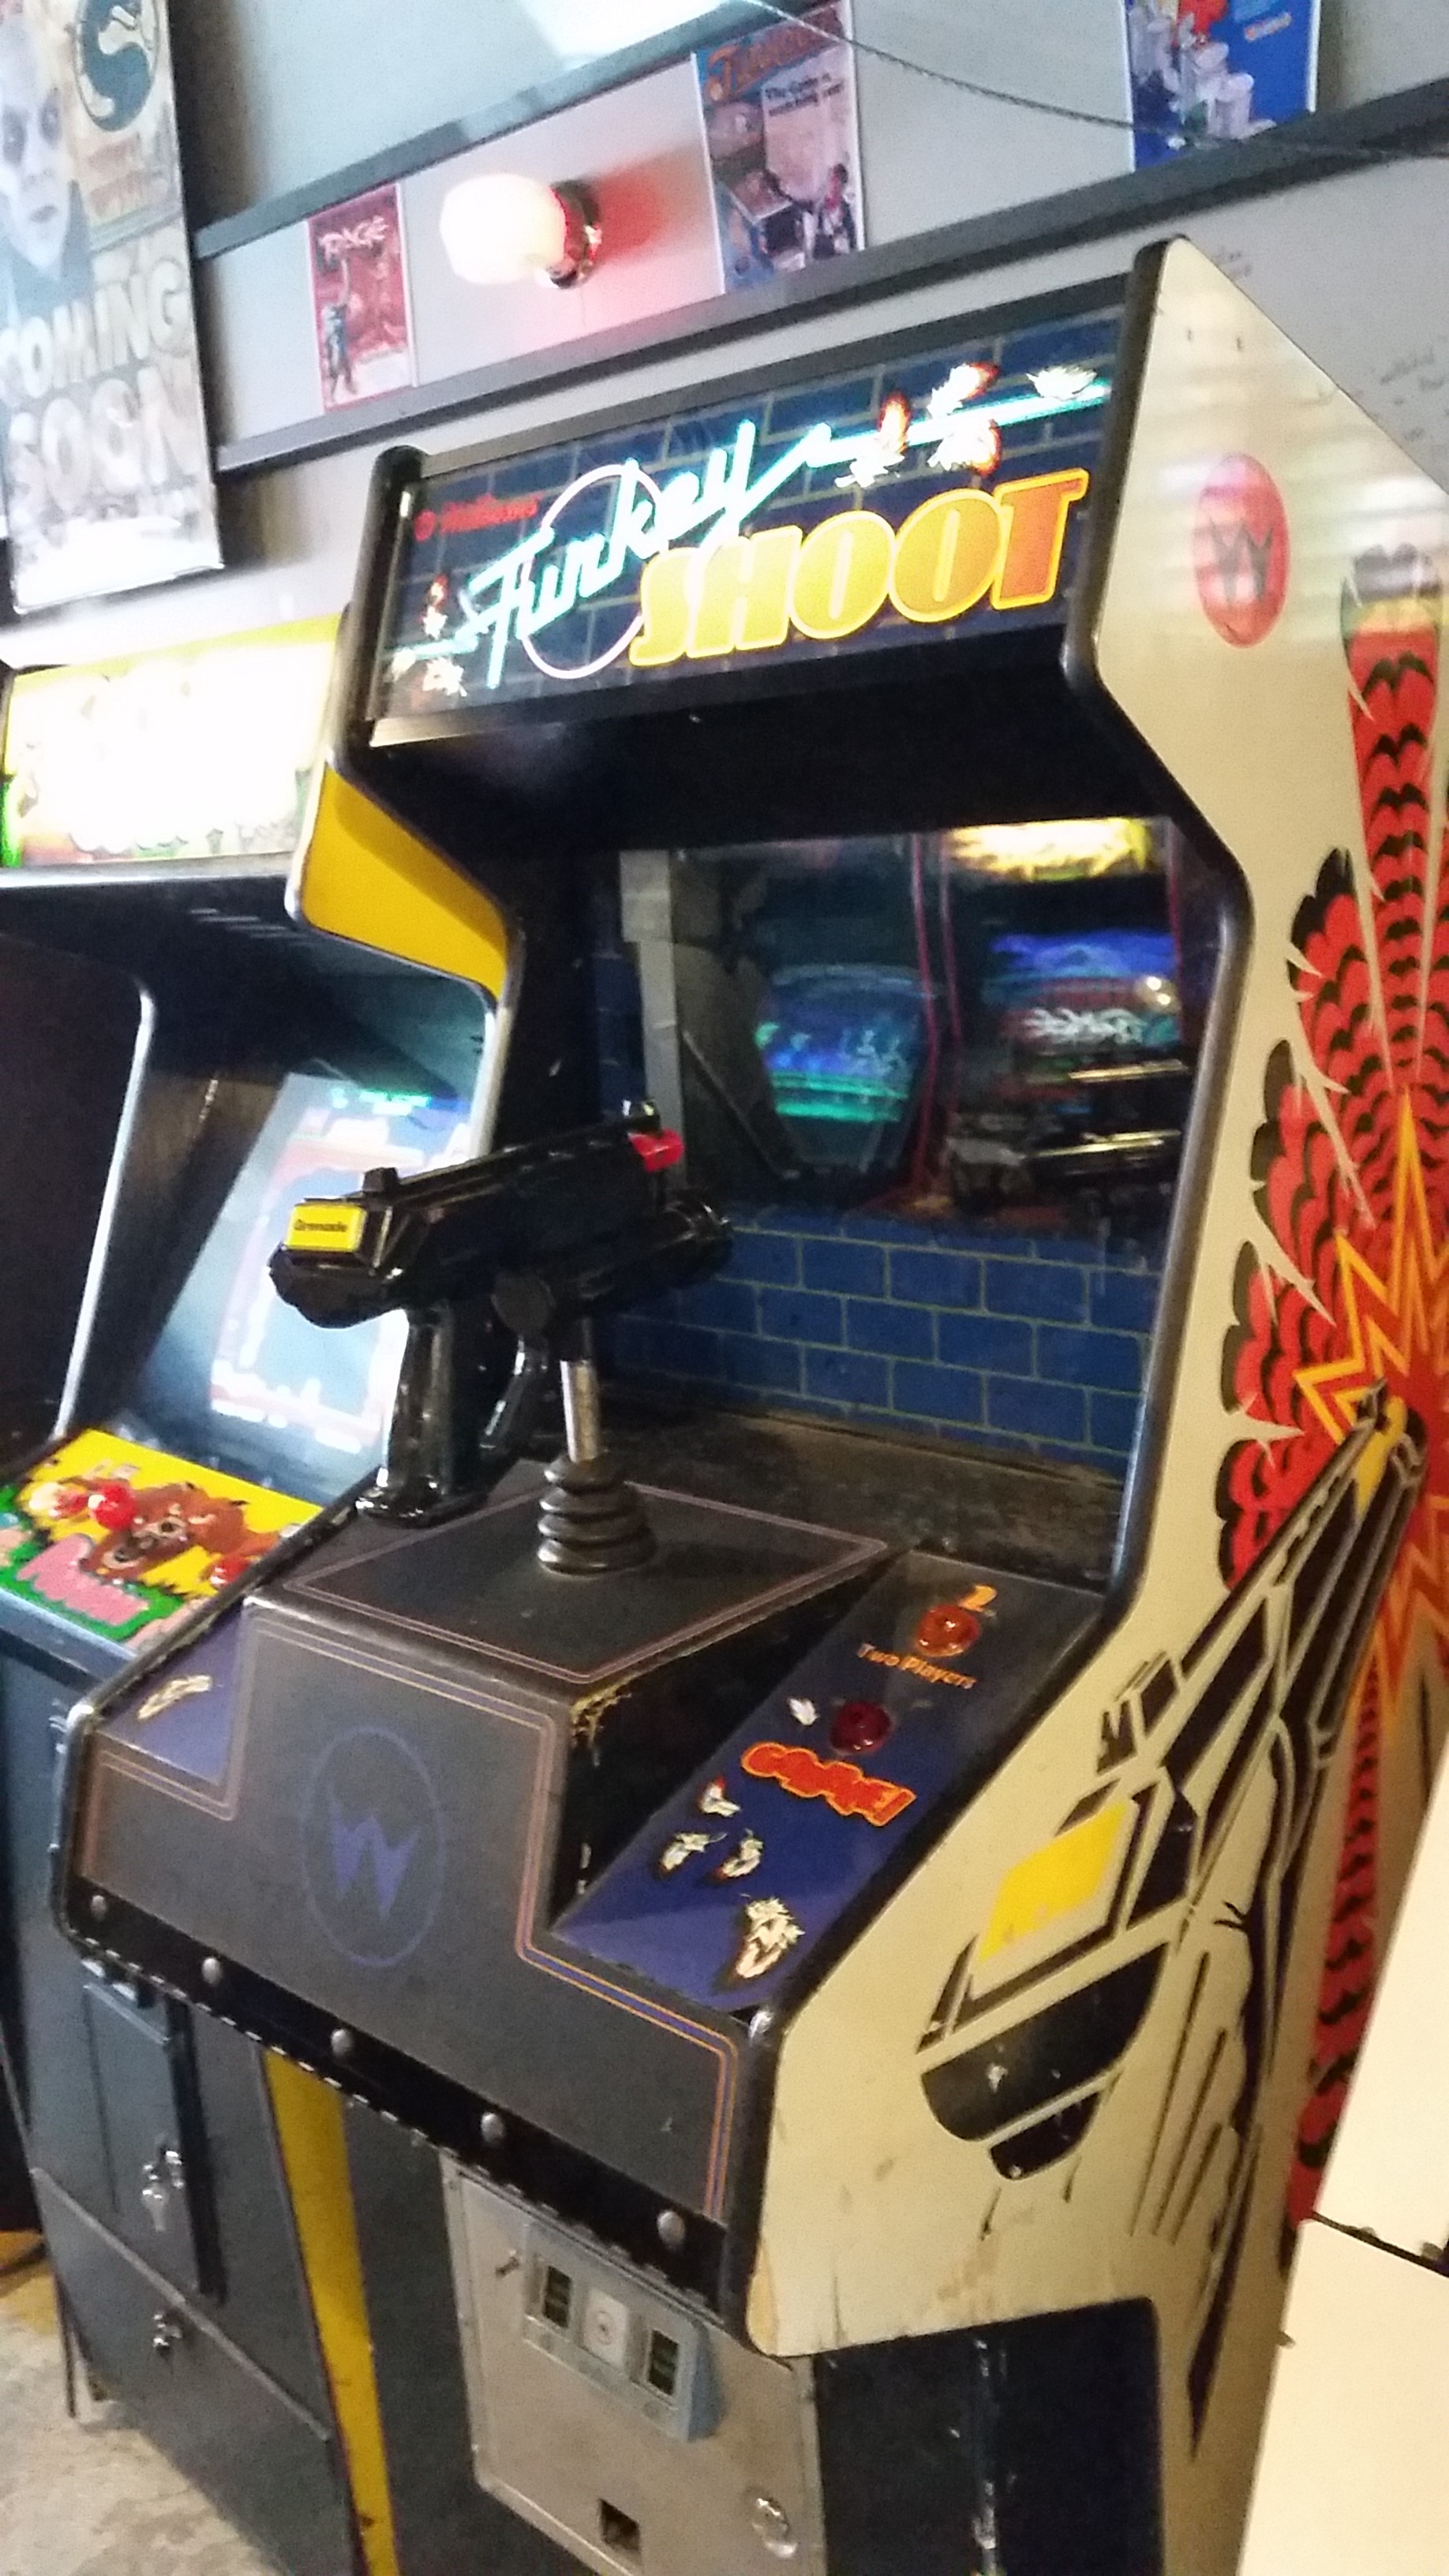 Turkey Shoot now at Galloping Ghost Arcade Galloping Ghost Arcade